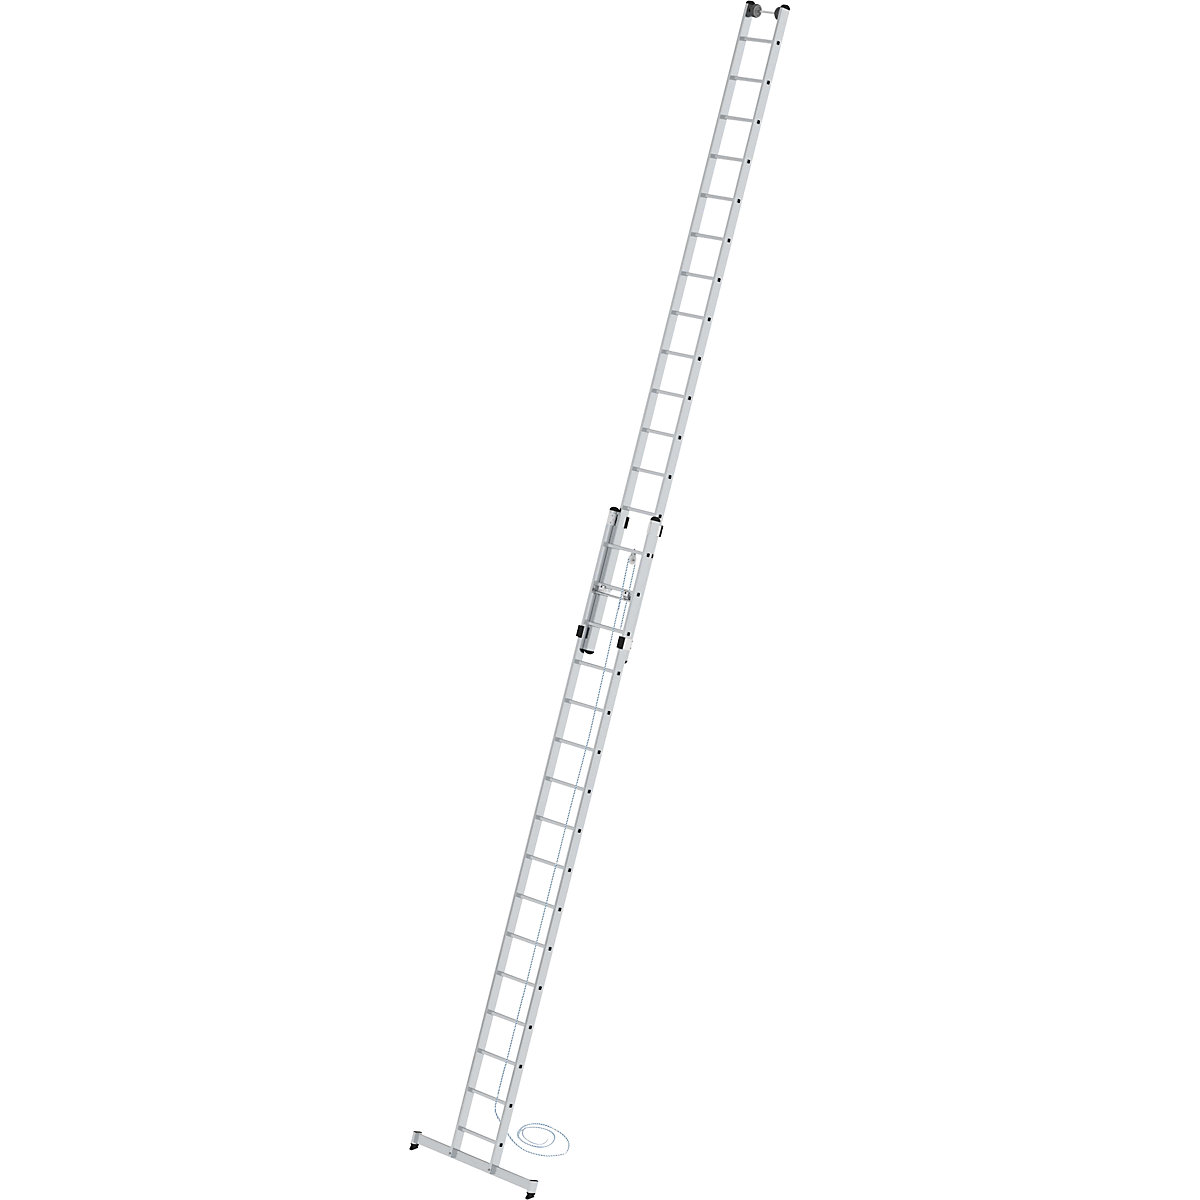 Height adjustable lean-to ladder – MUNK, rope operated extension ladder, 2-part with nivello® support, 2 x 16 rungs-4